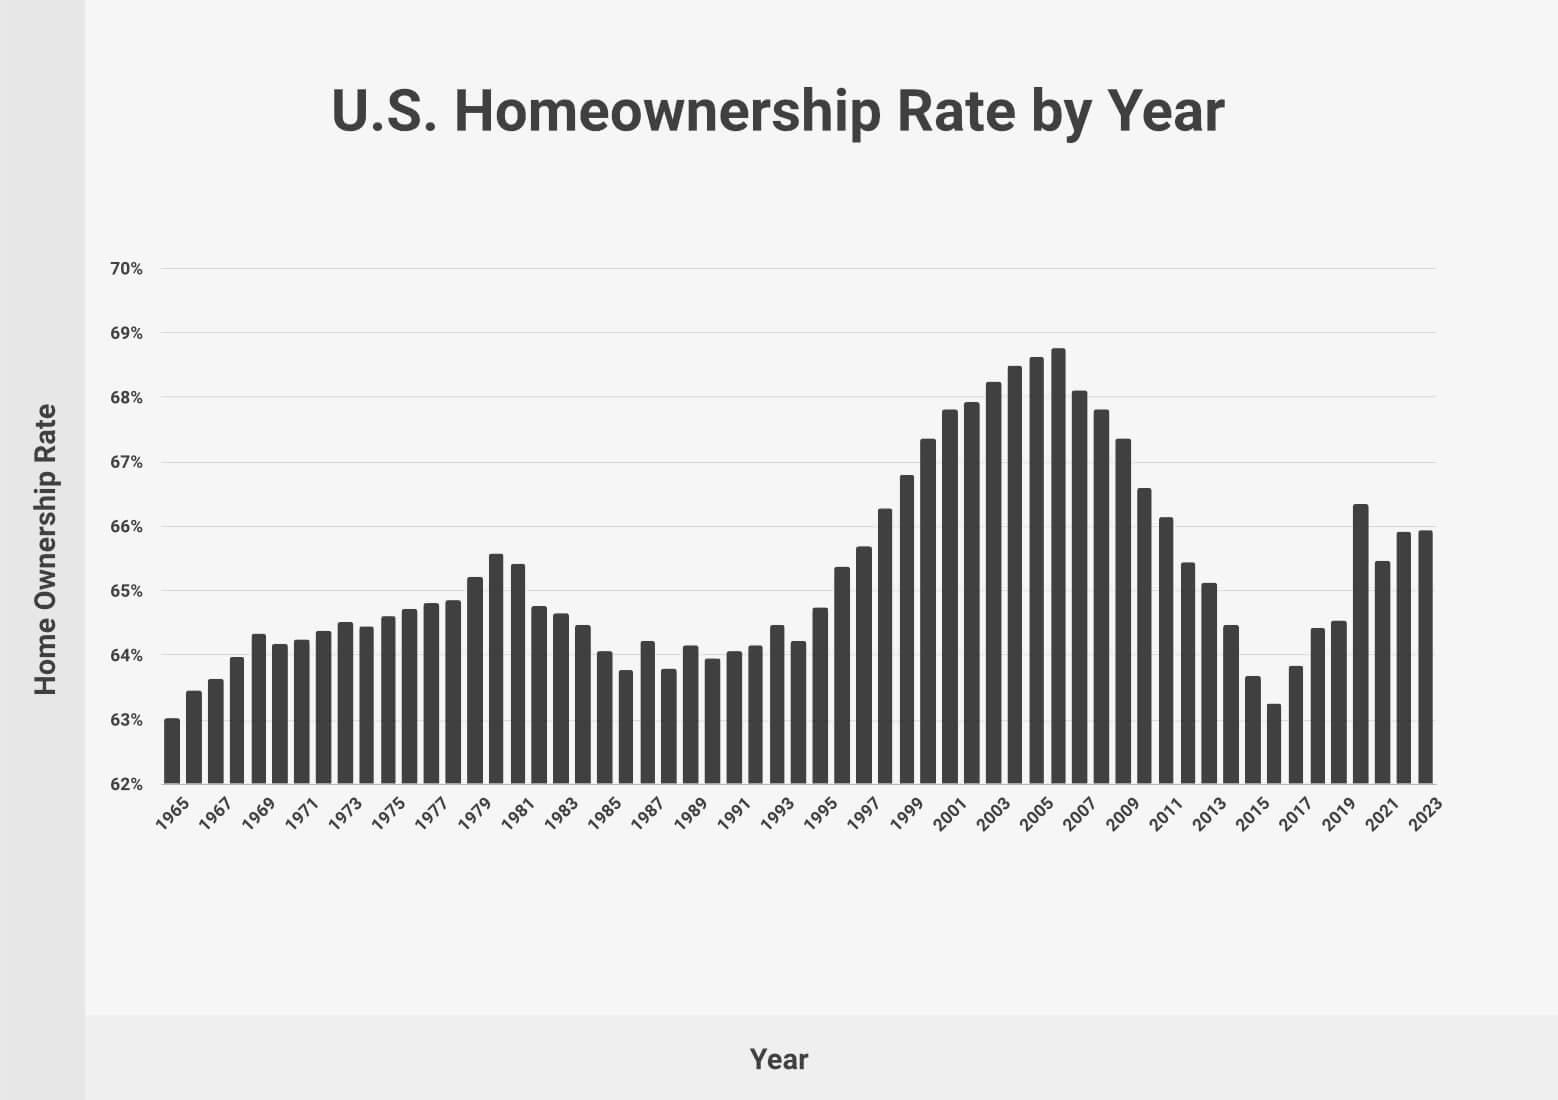 U.S. Homeownership Rate by Year